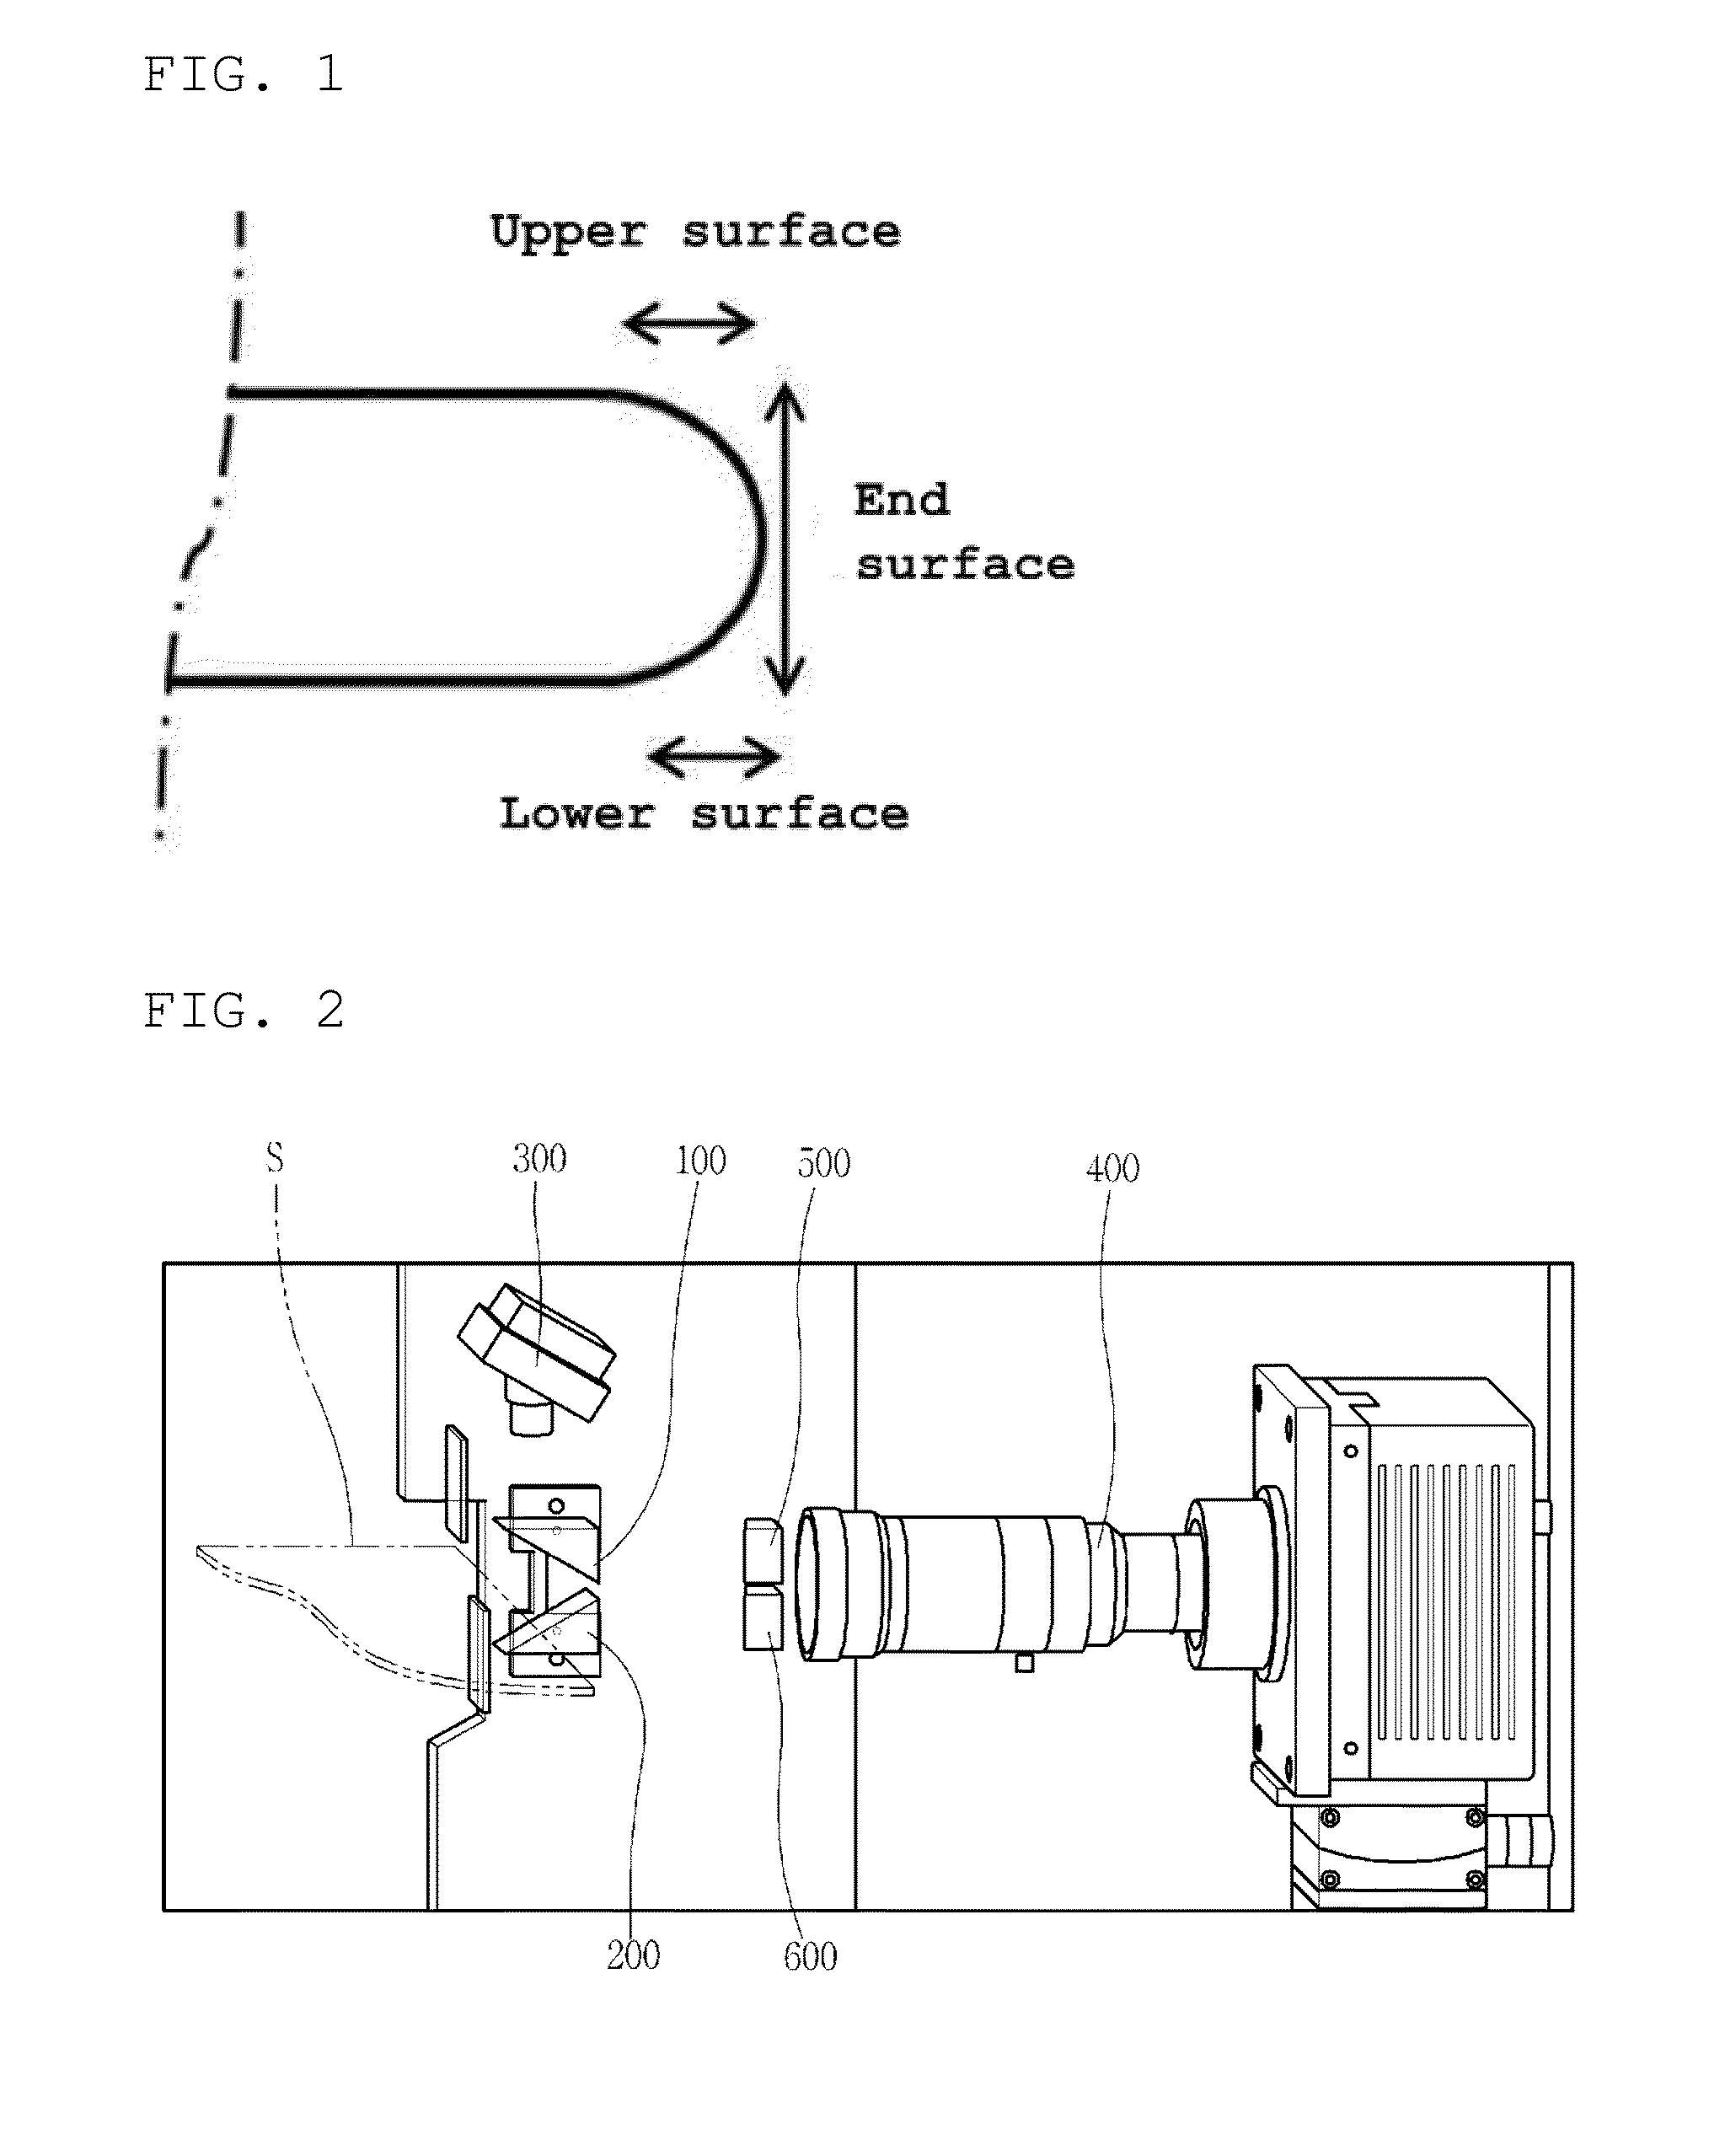 Apparatus for inspecting edge of substrate